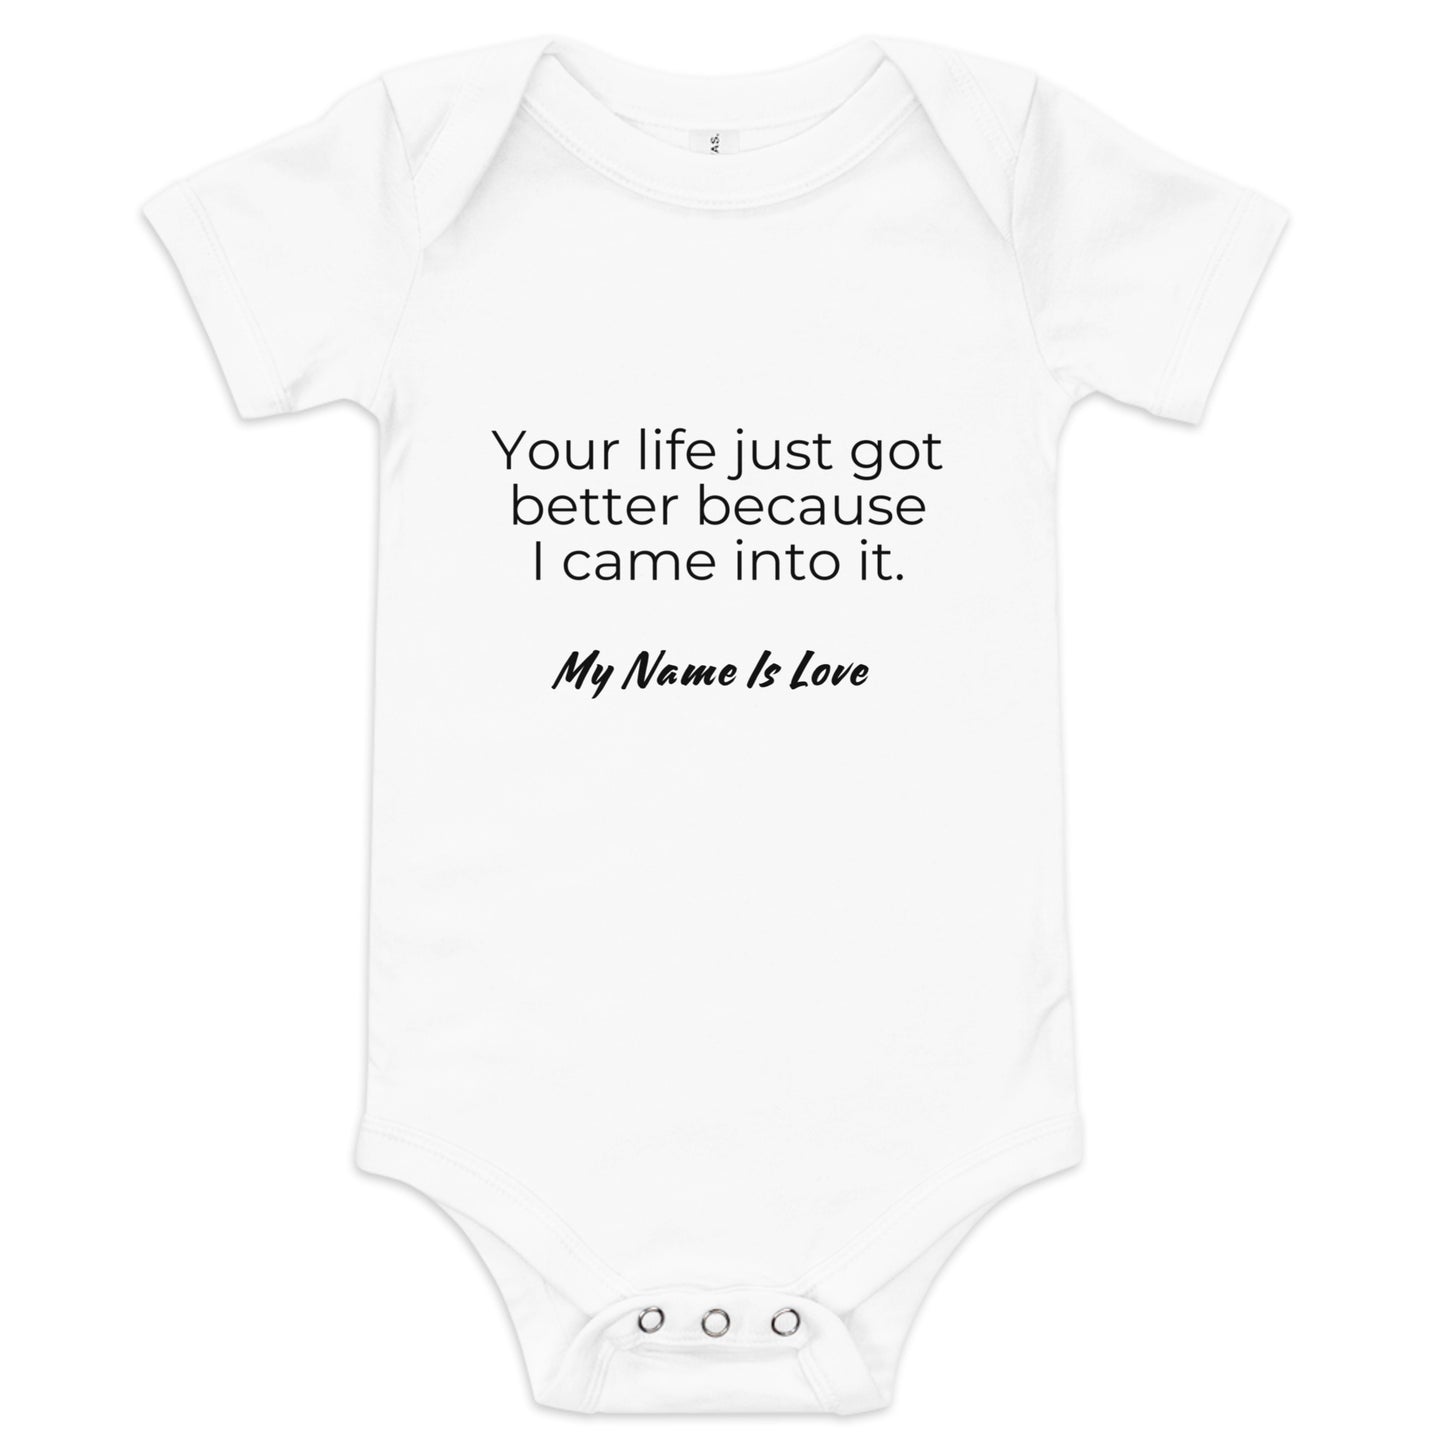 Your Life: Baby short sleeve one piece